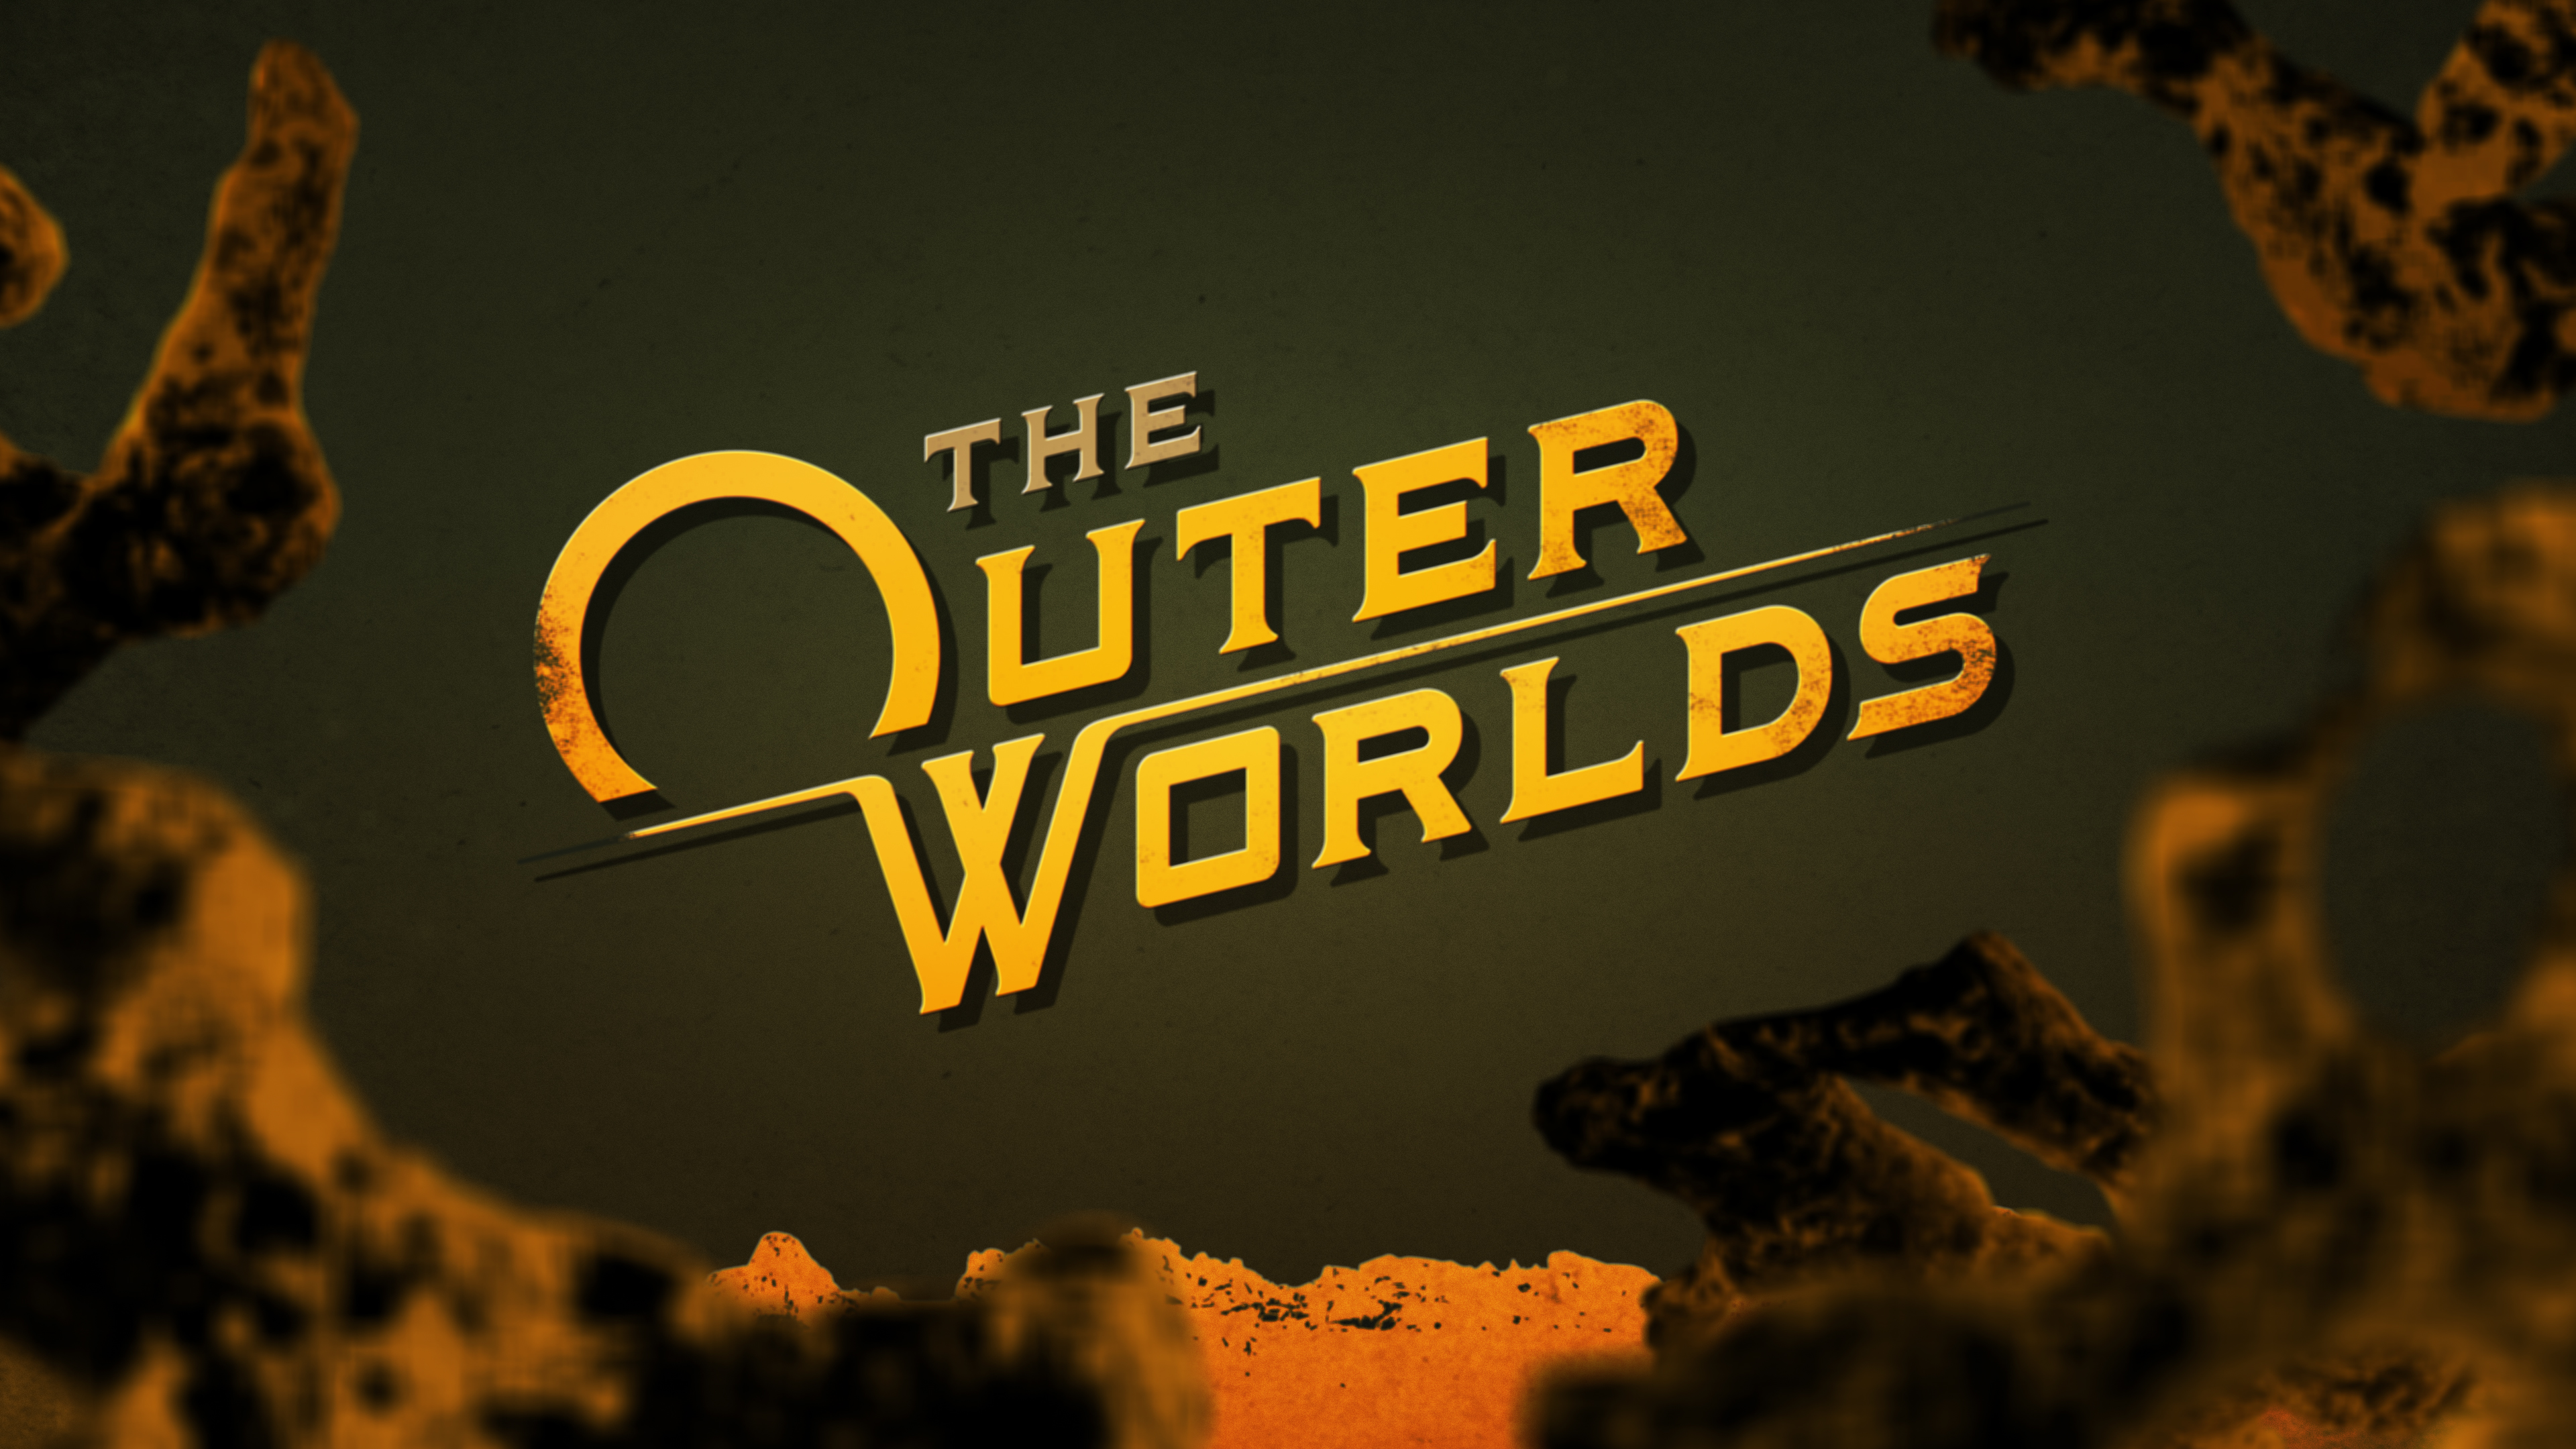 Video Game The Outer Worlds HD Wallpaper | Background Image